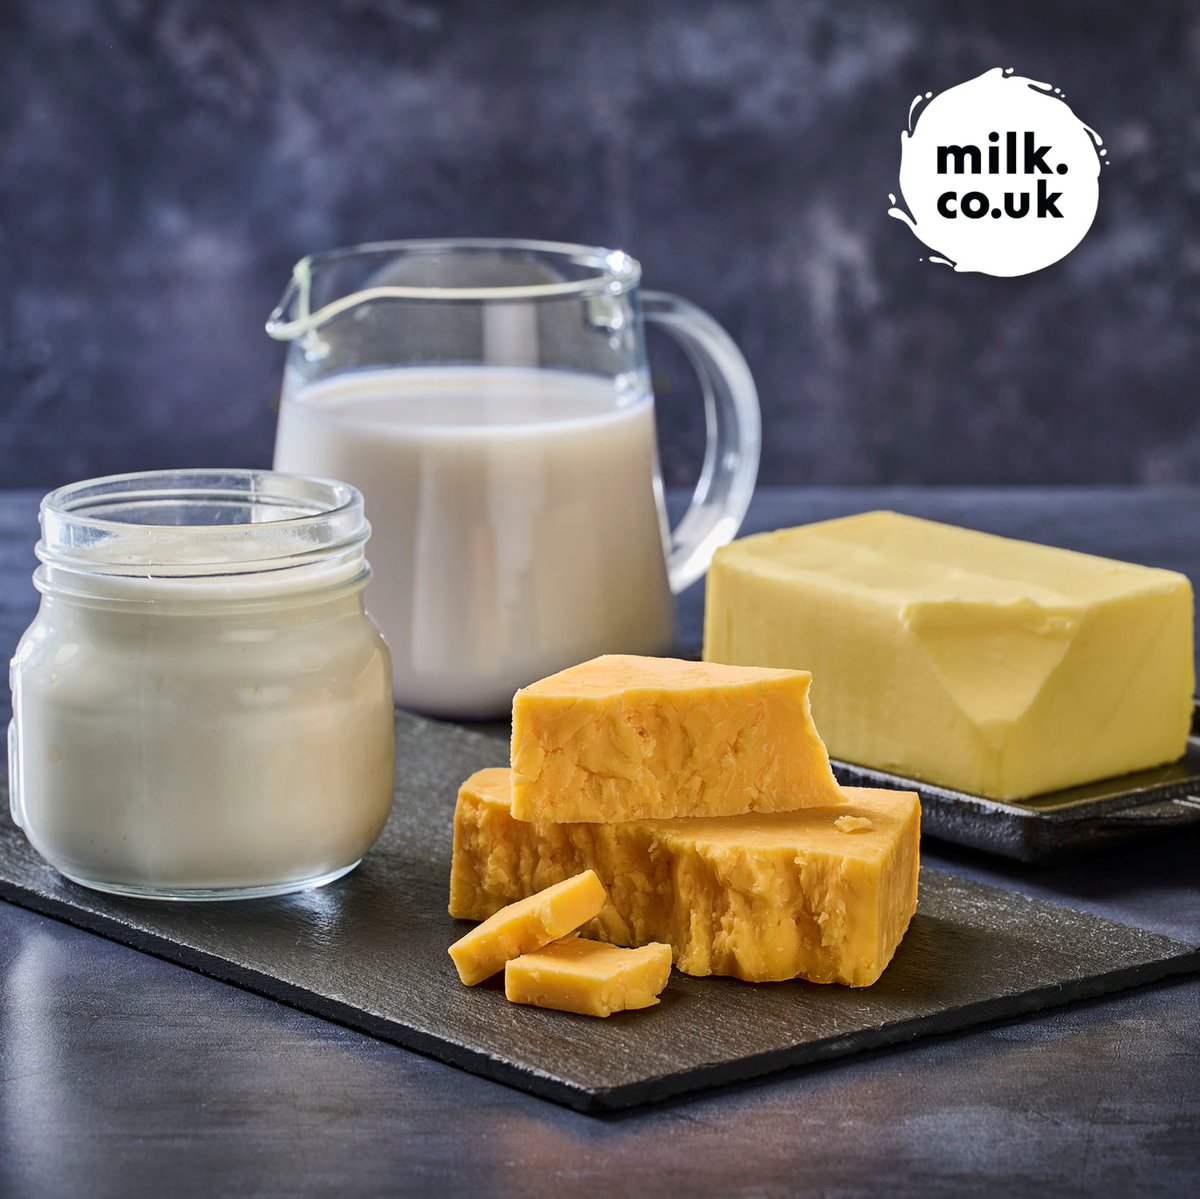 Including nutrient rich dairy in your cooking can help meet daily requirements of calcium, phosphorus and protein. Browse our #delicious #dairy recipes here: milk.co.uk/recipes/